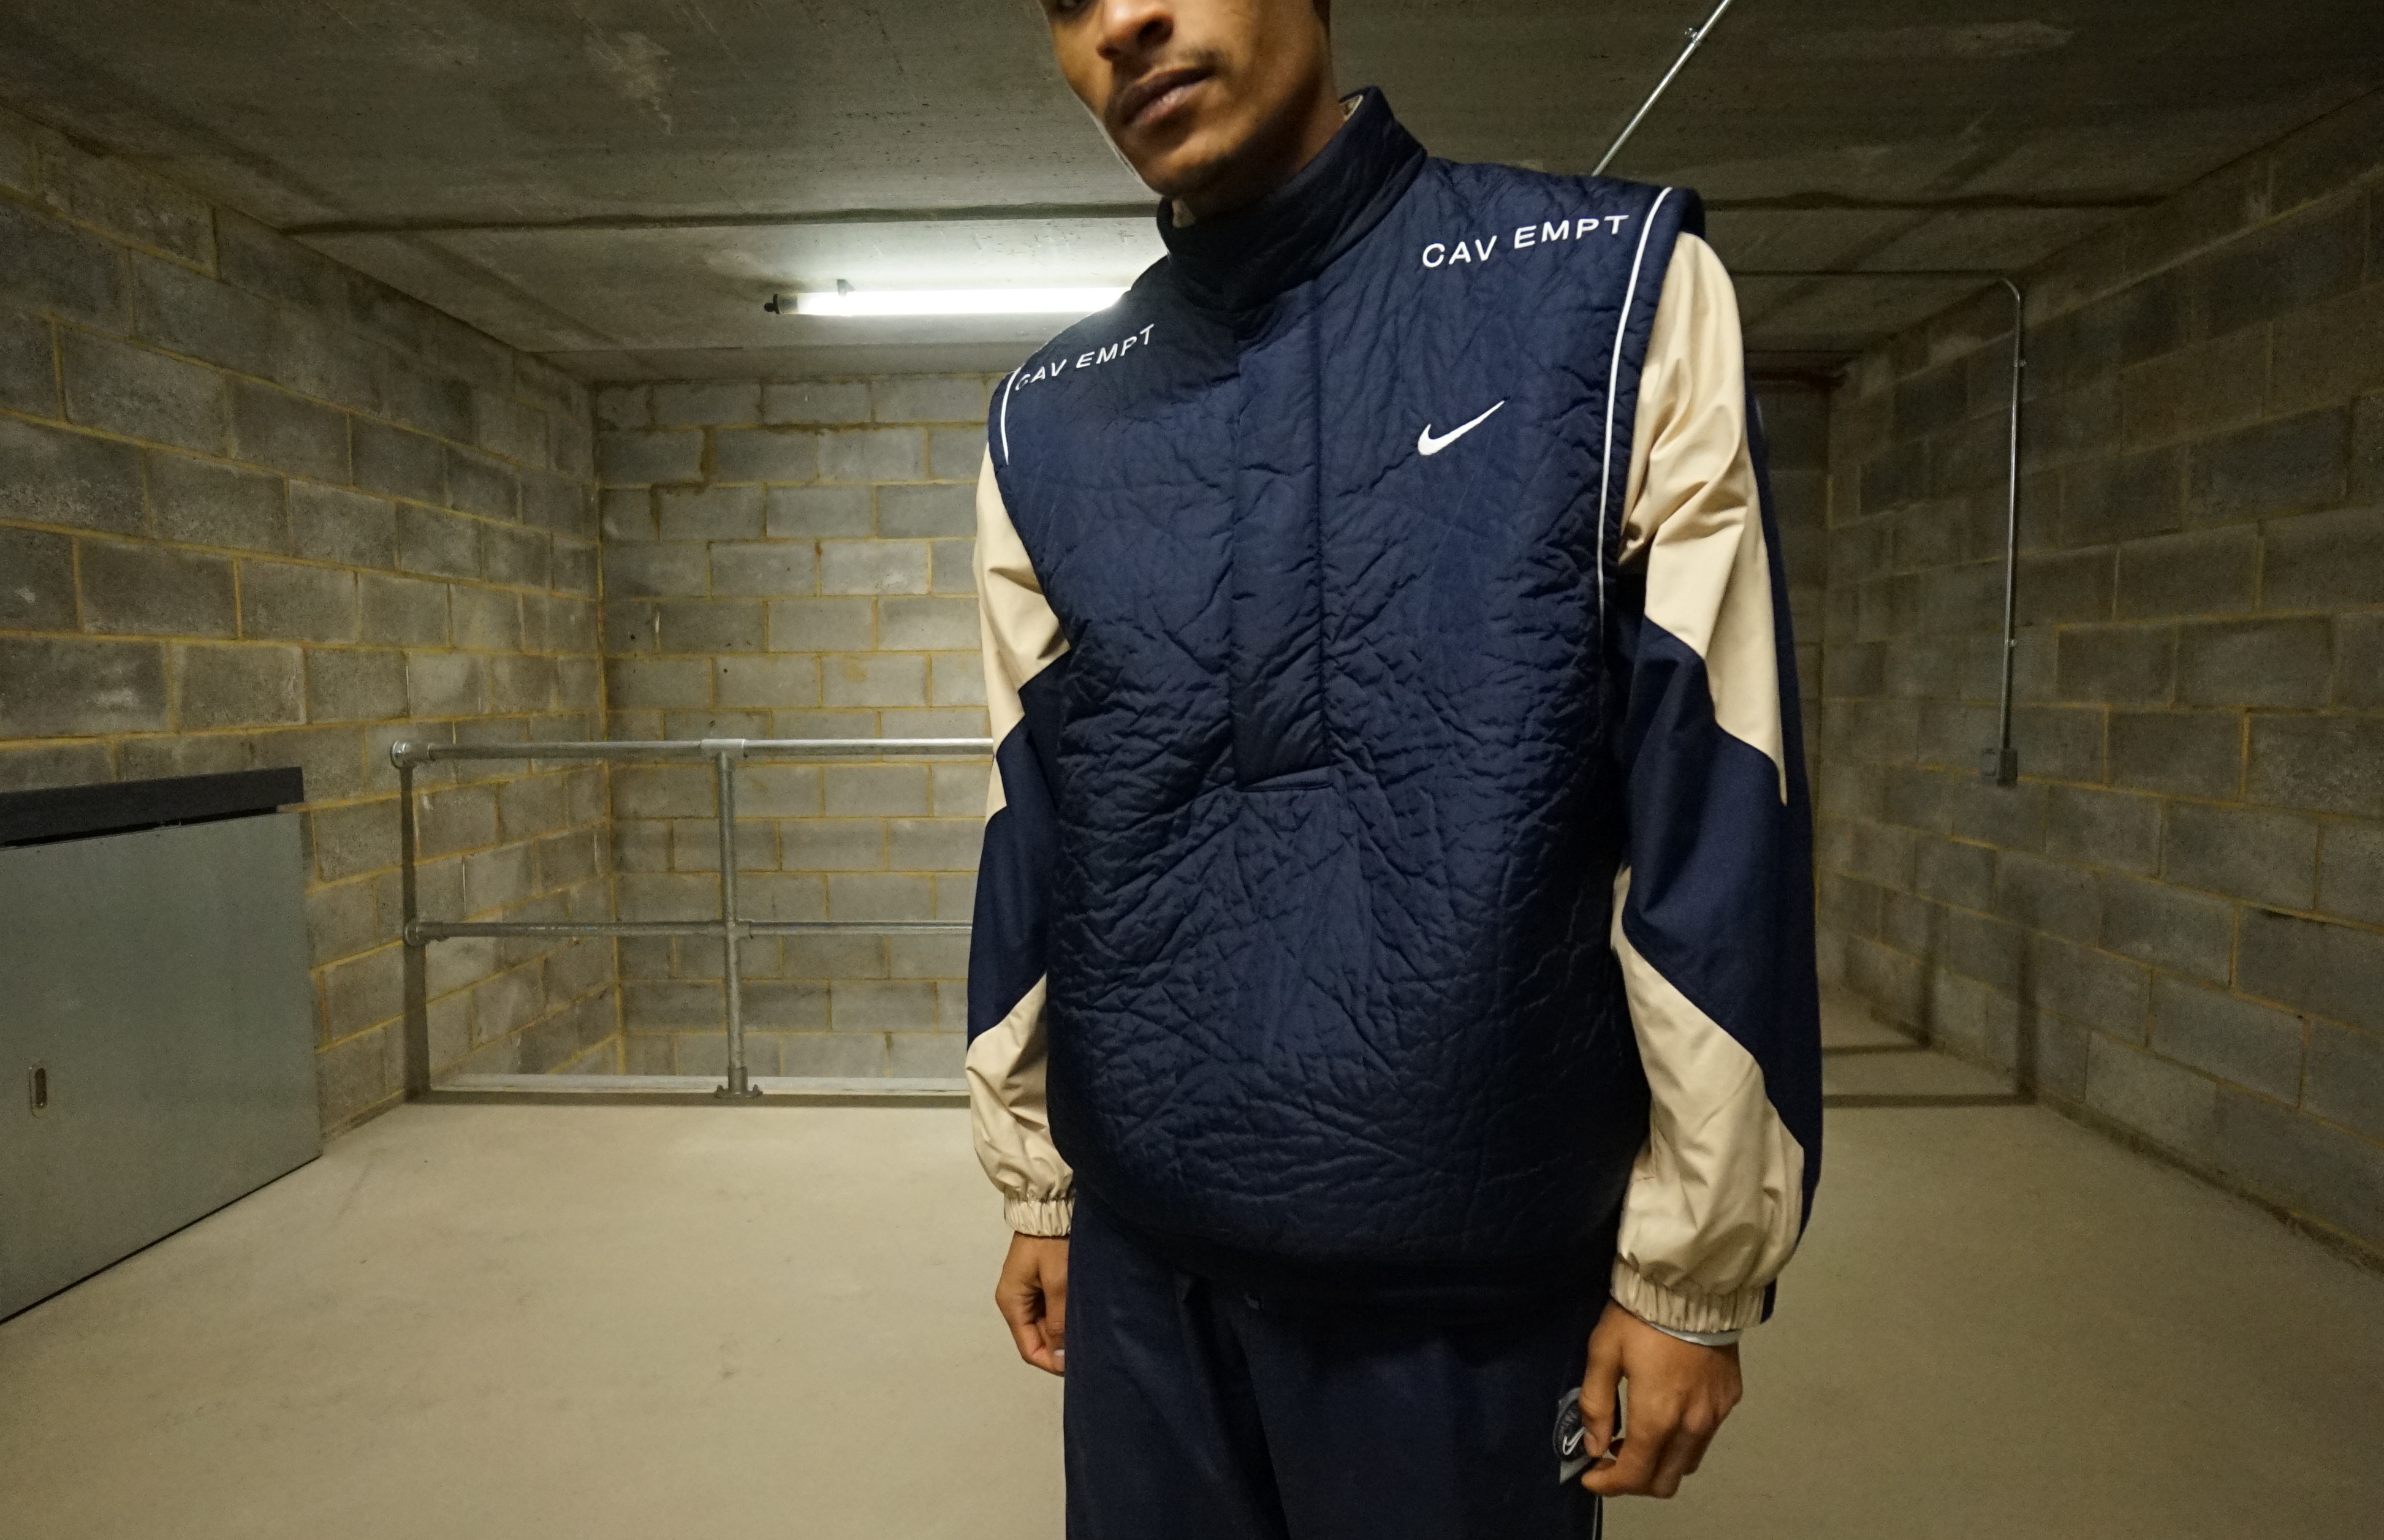 Cav Empt x Nike Collection